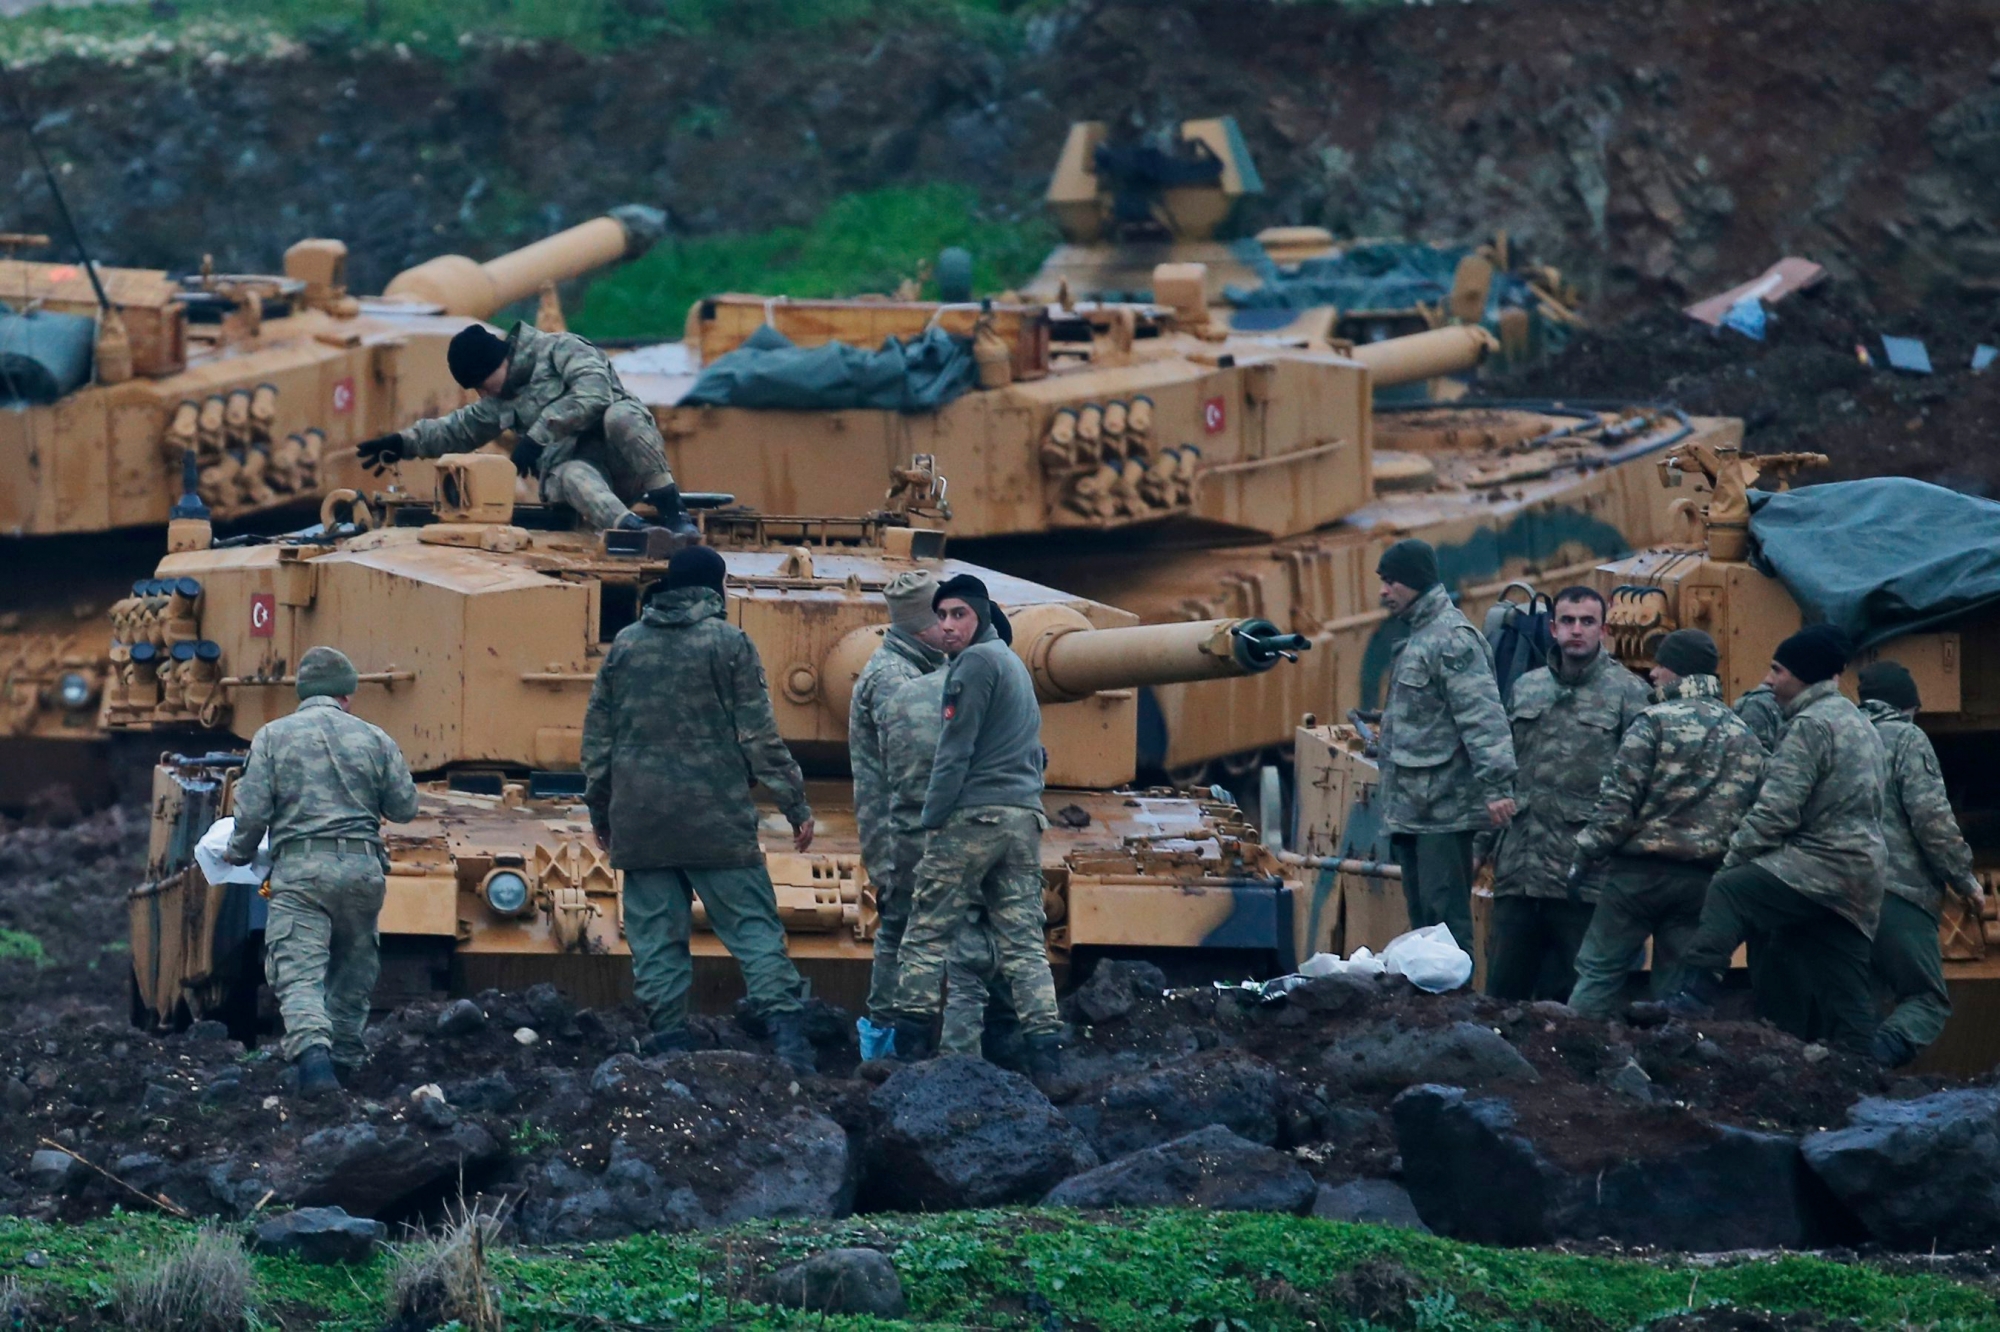 Turkish soldiers prepare their tanks to enter combat and join a military offensive on a Kurdish-held enclave in northern Syria, at a staging area in the Hatay province,Turkey near the the border with Syria.Turkey launched an operation, codenamed Olive Branch, last week against the Syrian Kurdish People's Protection Units in Afrin, Syria that it deems a terror group. The operation codenamed Olive Branch is on its fourth day. (AP Photo/Lefteris Pitarakis) Turkey Syria